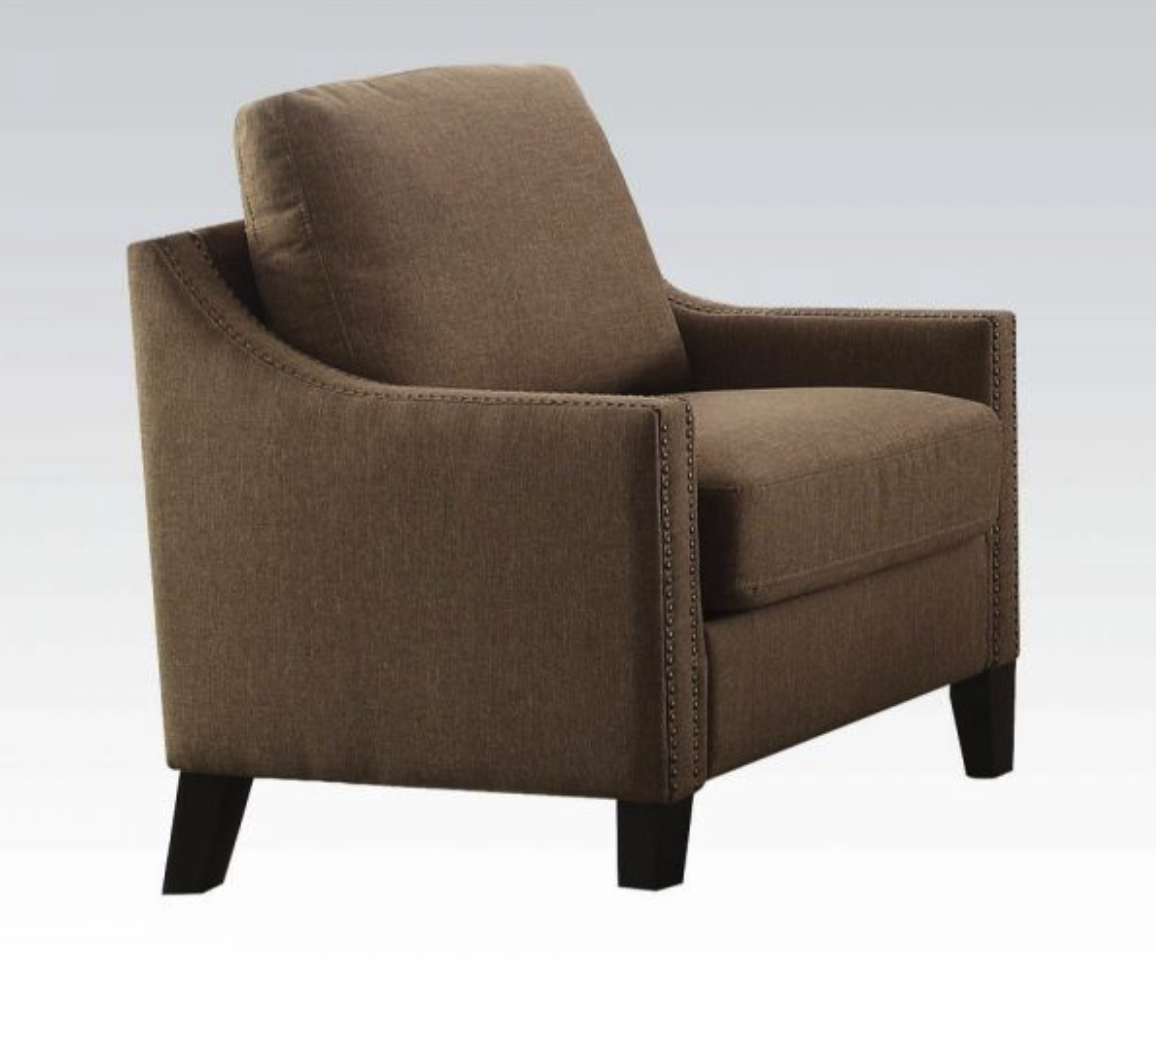 Zapata Transitional Upholstered Sofa in Brown - Acme Furniture